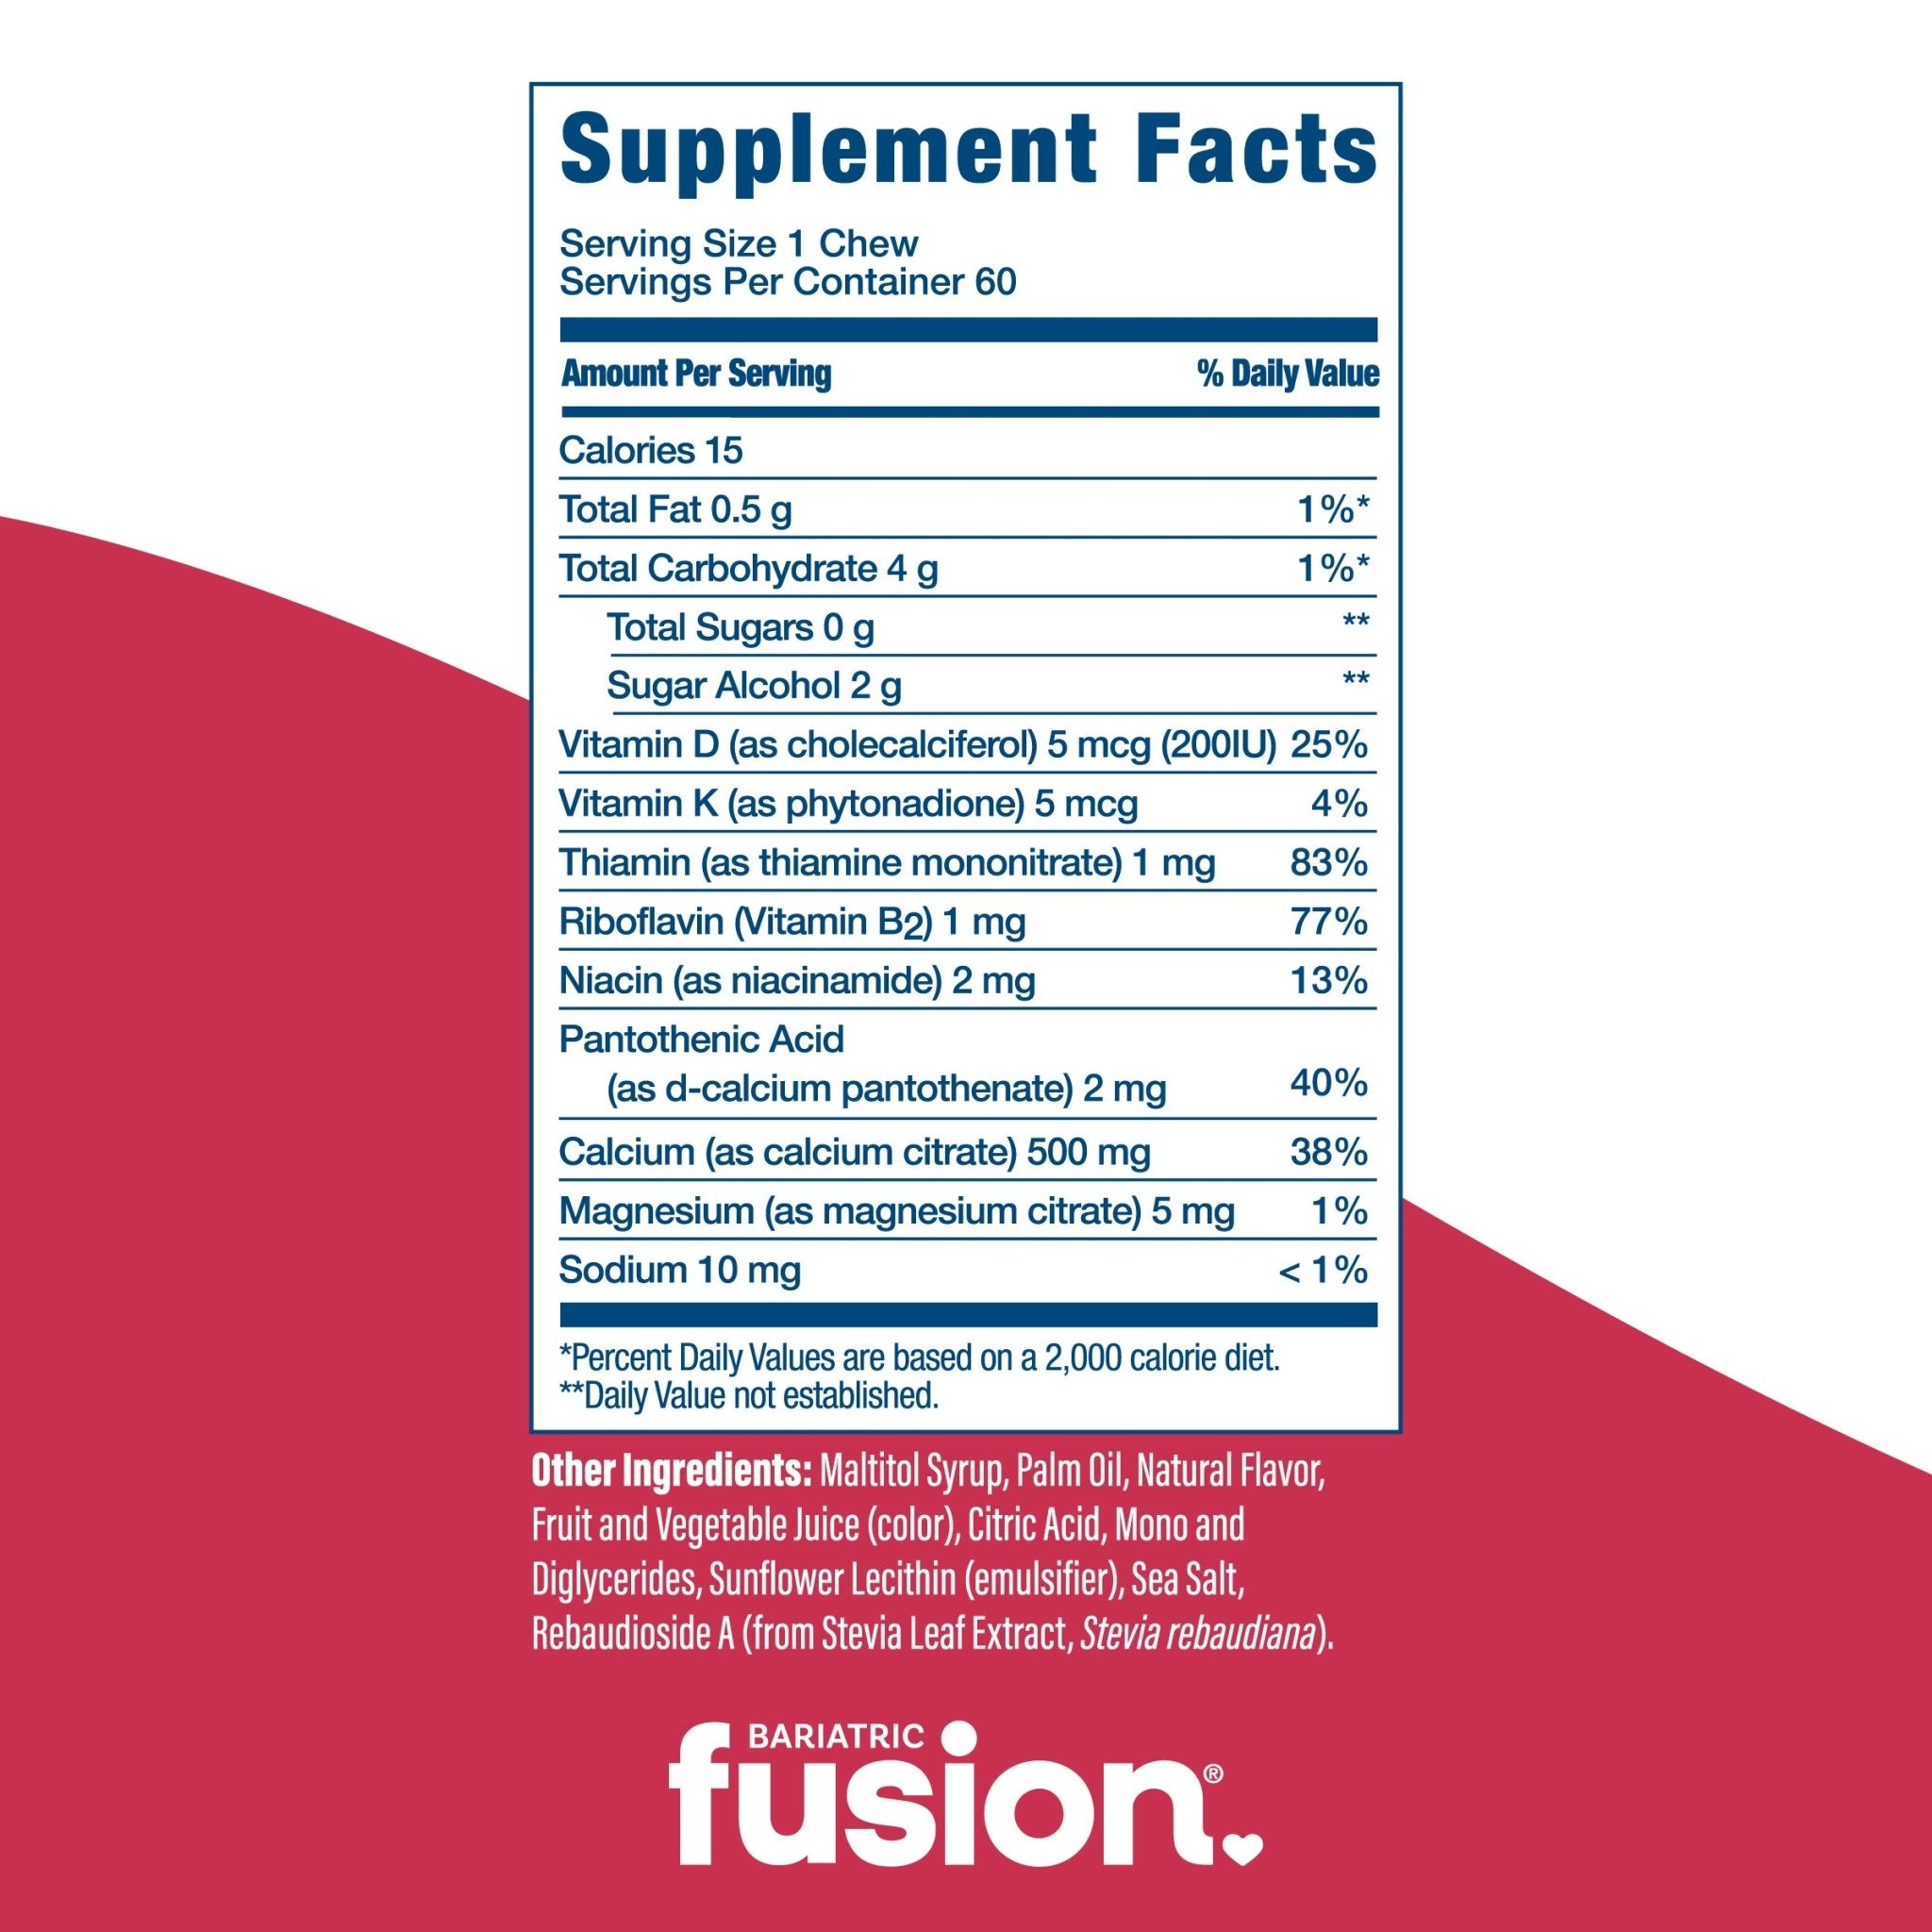 Strawberry Blast Bariatric Calcium Citrate Soft Chews supplement facts.